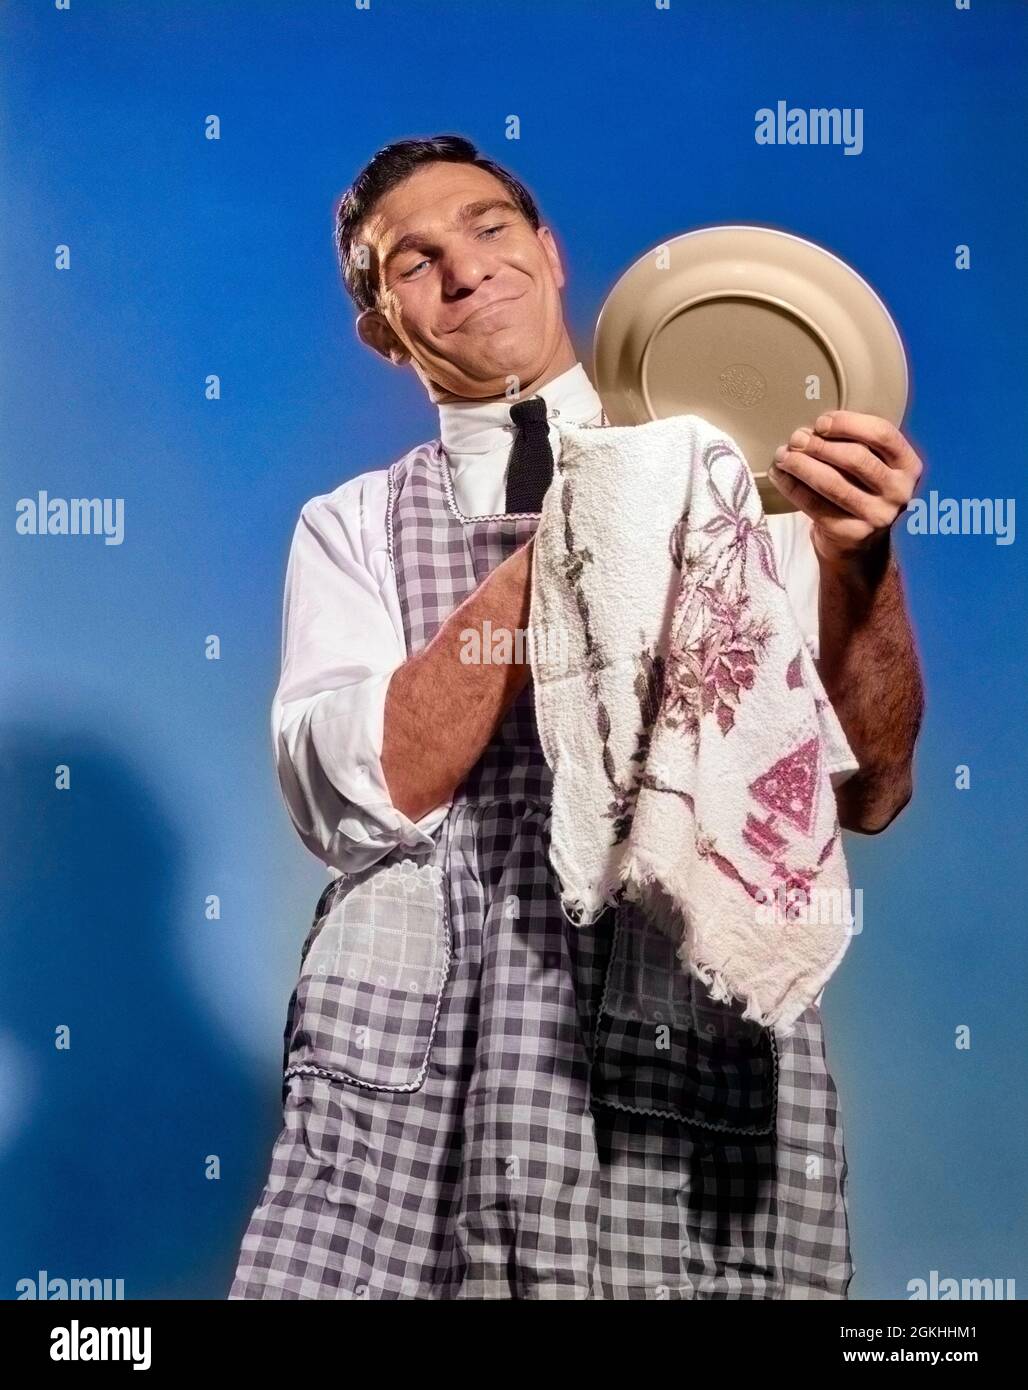 https://c8.alamy.com/comp/2GKHHM1/1960s-1950s-smiling-man-husband-in-apron-washing-and-drying-dishes-in-kitchen-s10163c-deb001-hars-old-fashion-1-towel-dish-assistant-lifestyle-studio-shot-home-life-copy-space-half-length-dry-cloth-caring-americana-bw-womans-wipe-happiness-chore-drying-mate-glad-womans-liberation-low-angle-pride-up-dish-towel-clean-up-delight-househusband-deb001-middle-age-assist-liberated-liberation-mid-adult-mid-adult-man-black-and-white-caucasian-ethnicity-old-fashioned-2GKHHM1.jpg